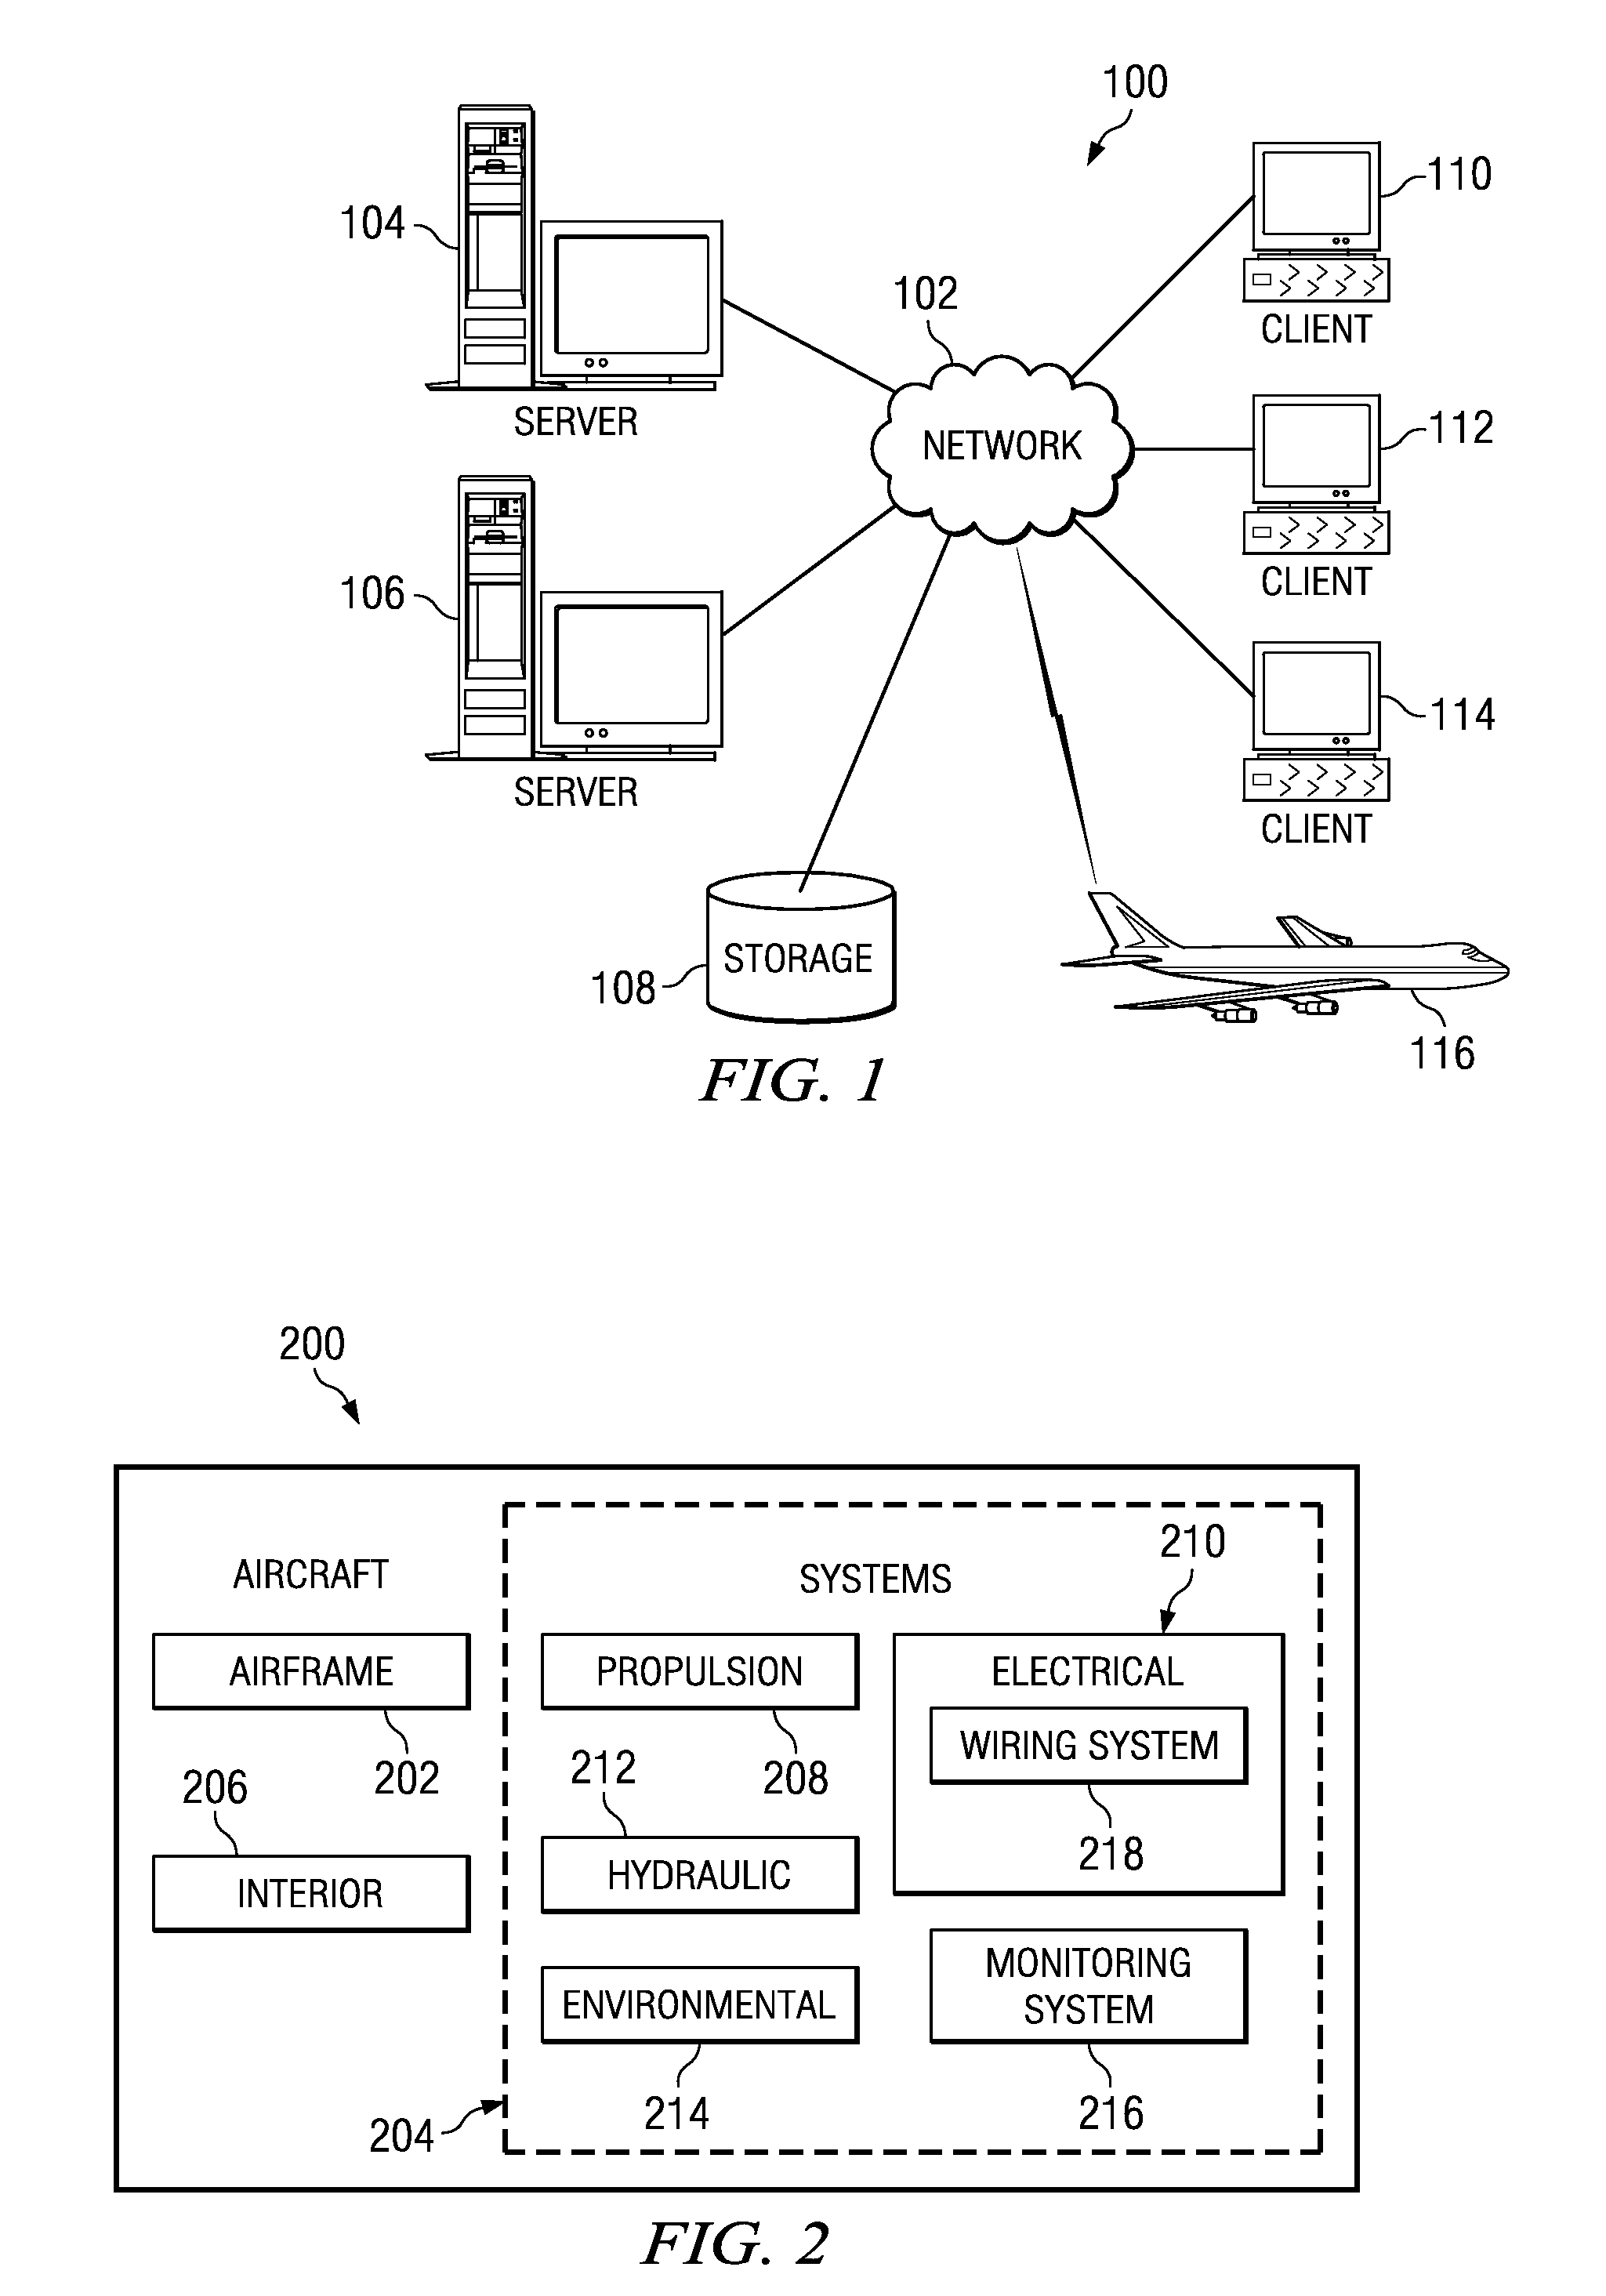 Wire fault illumination and display